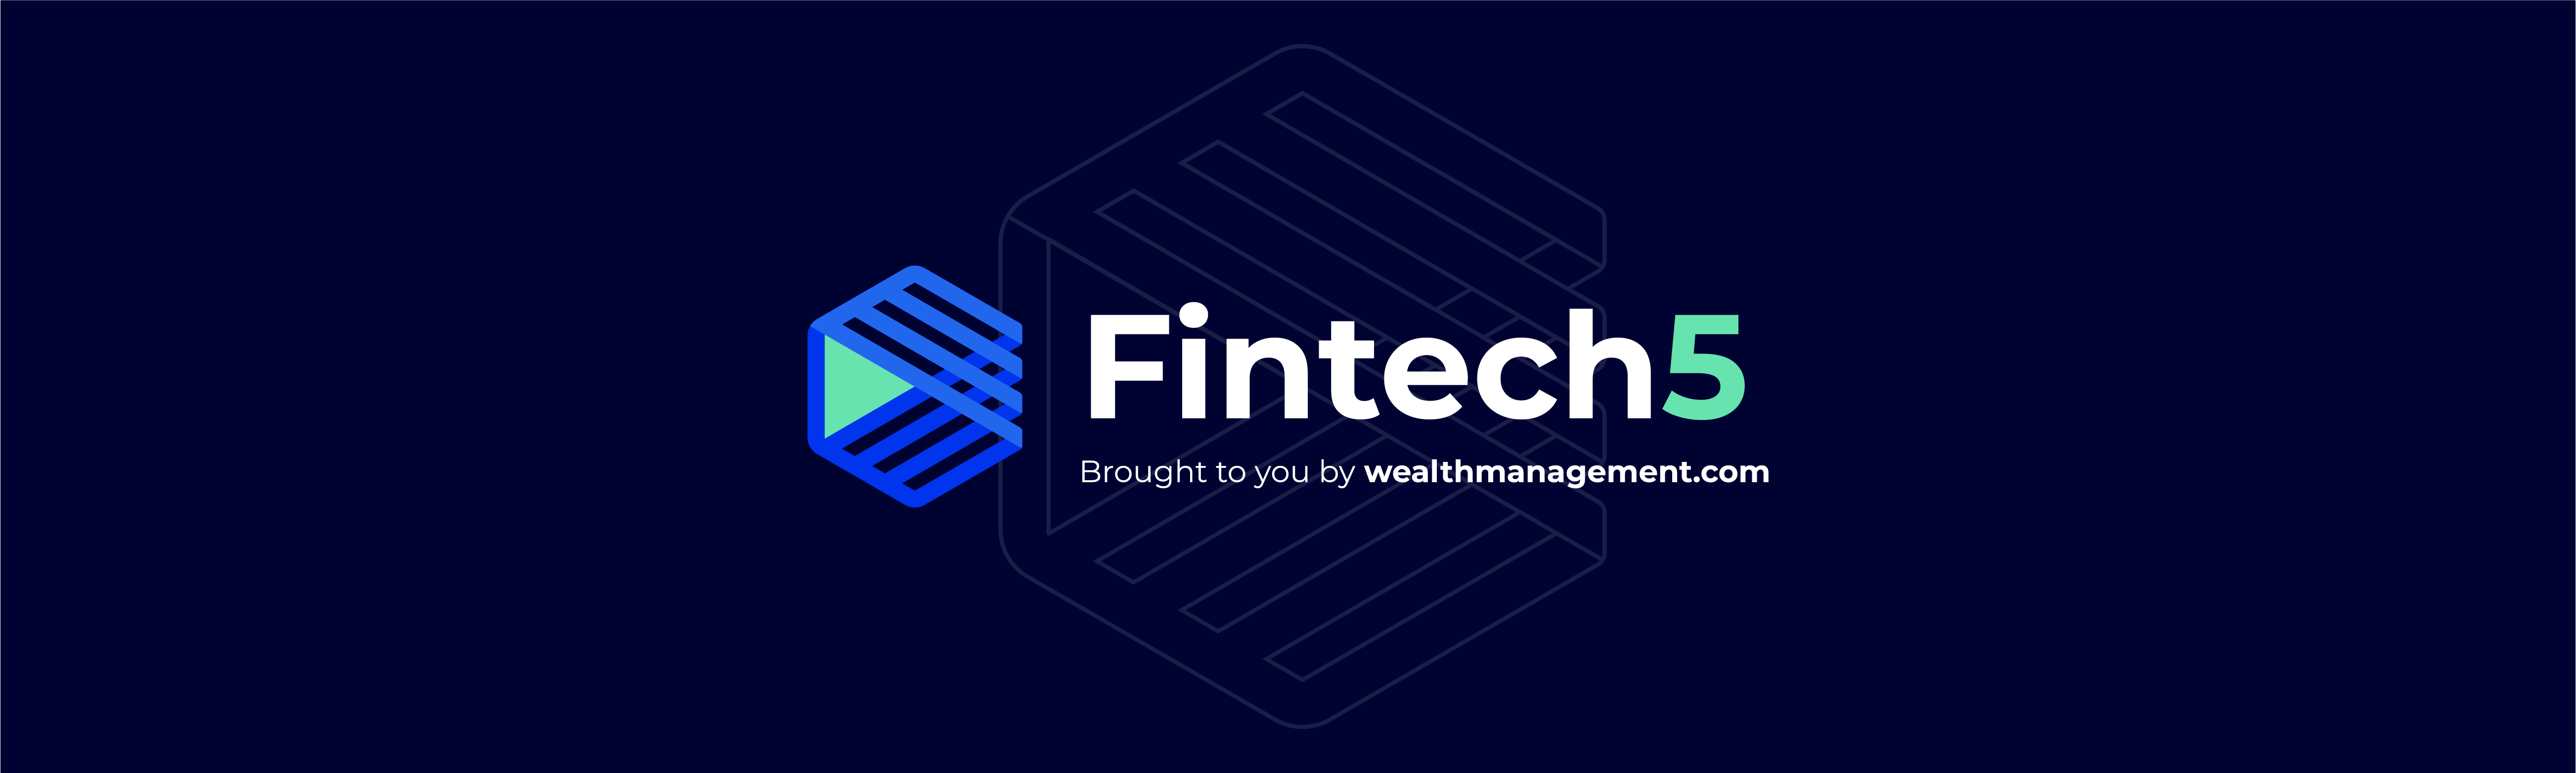 Fintech 5 brought to you by wealthmanagement.com